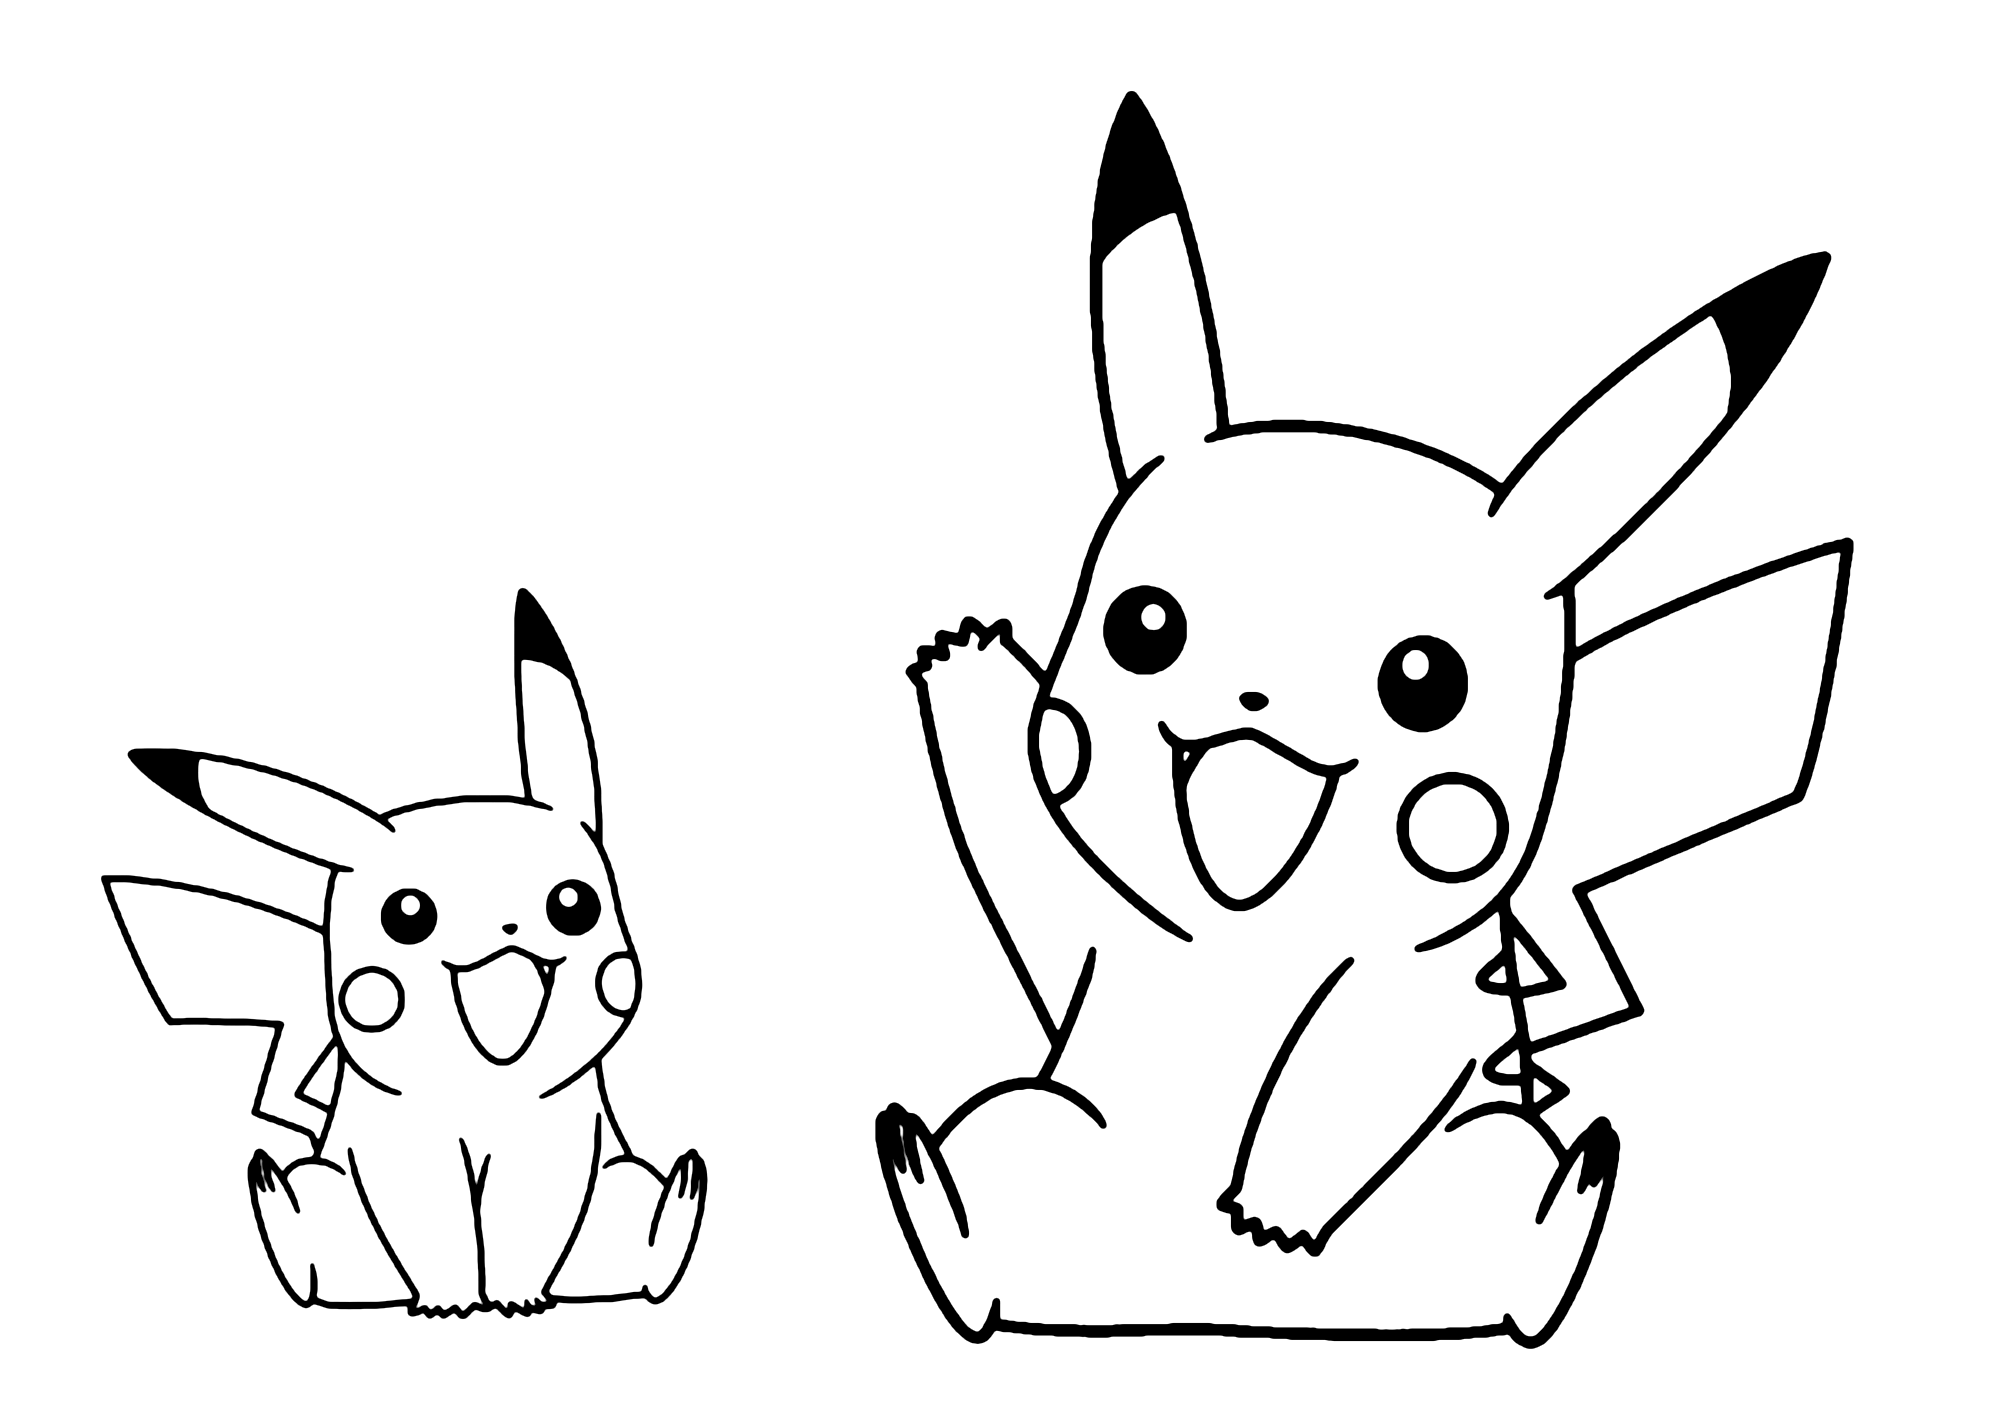 Pikachu Coloring Pages: Electric Type Pokemon